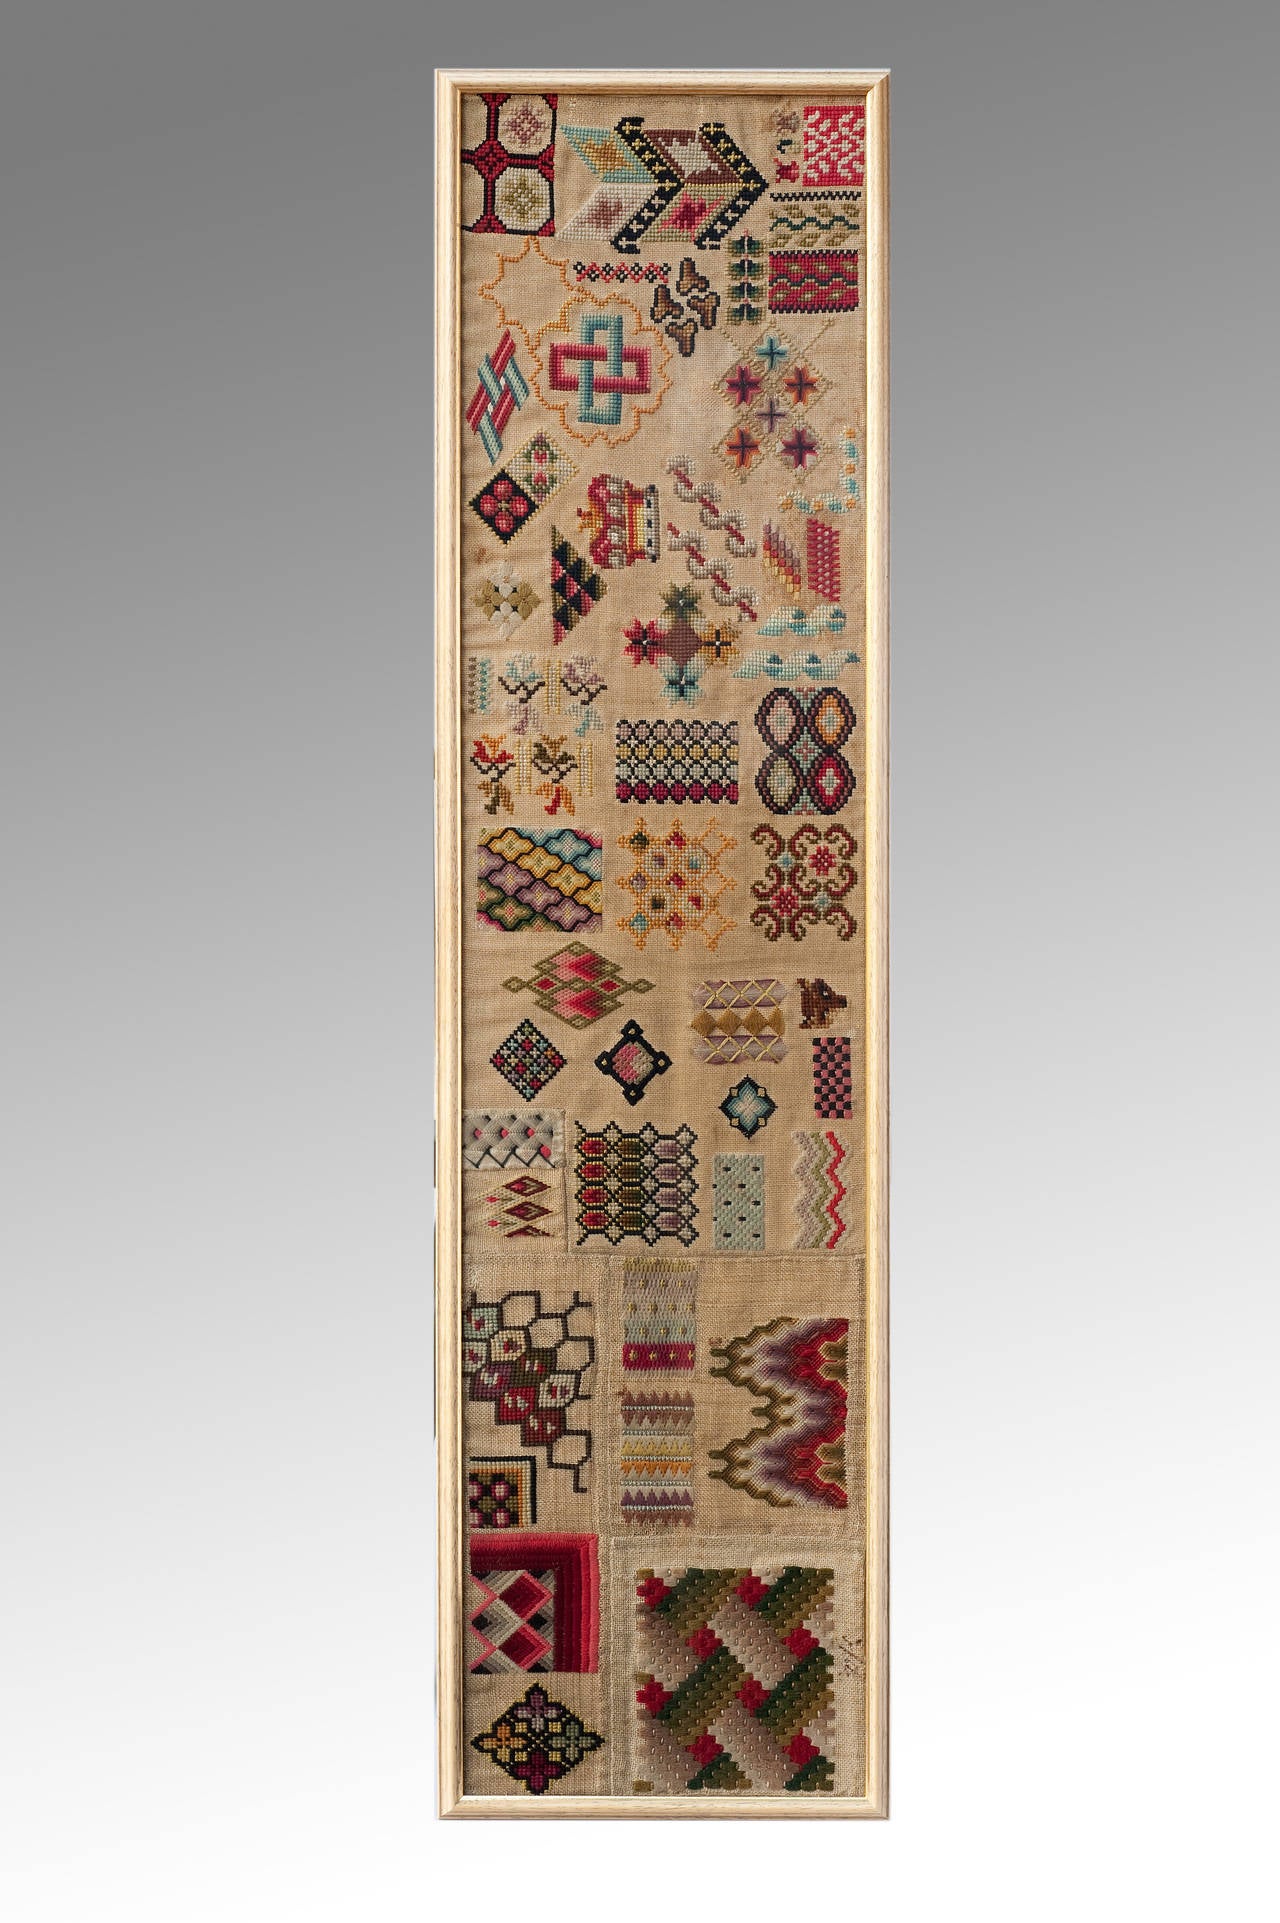 A very decorative and colourful mid-19th century spot sampler most probably worked in a professional workshop and illustrating a diversity of various patterns in the Berlin style, including Bargello stitch-work it is an antique sampler with some